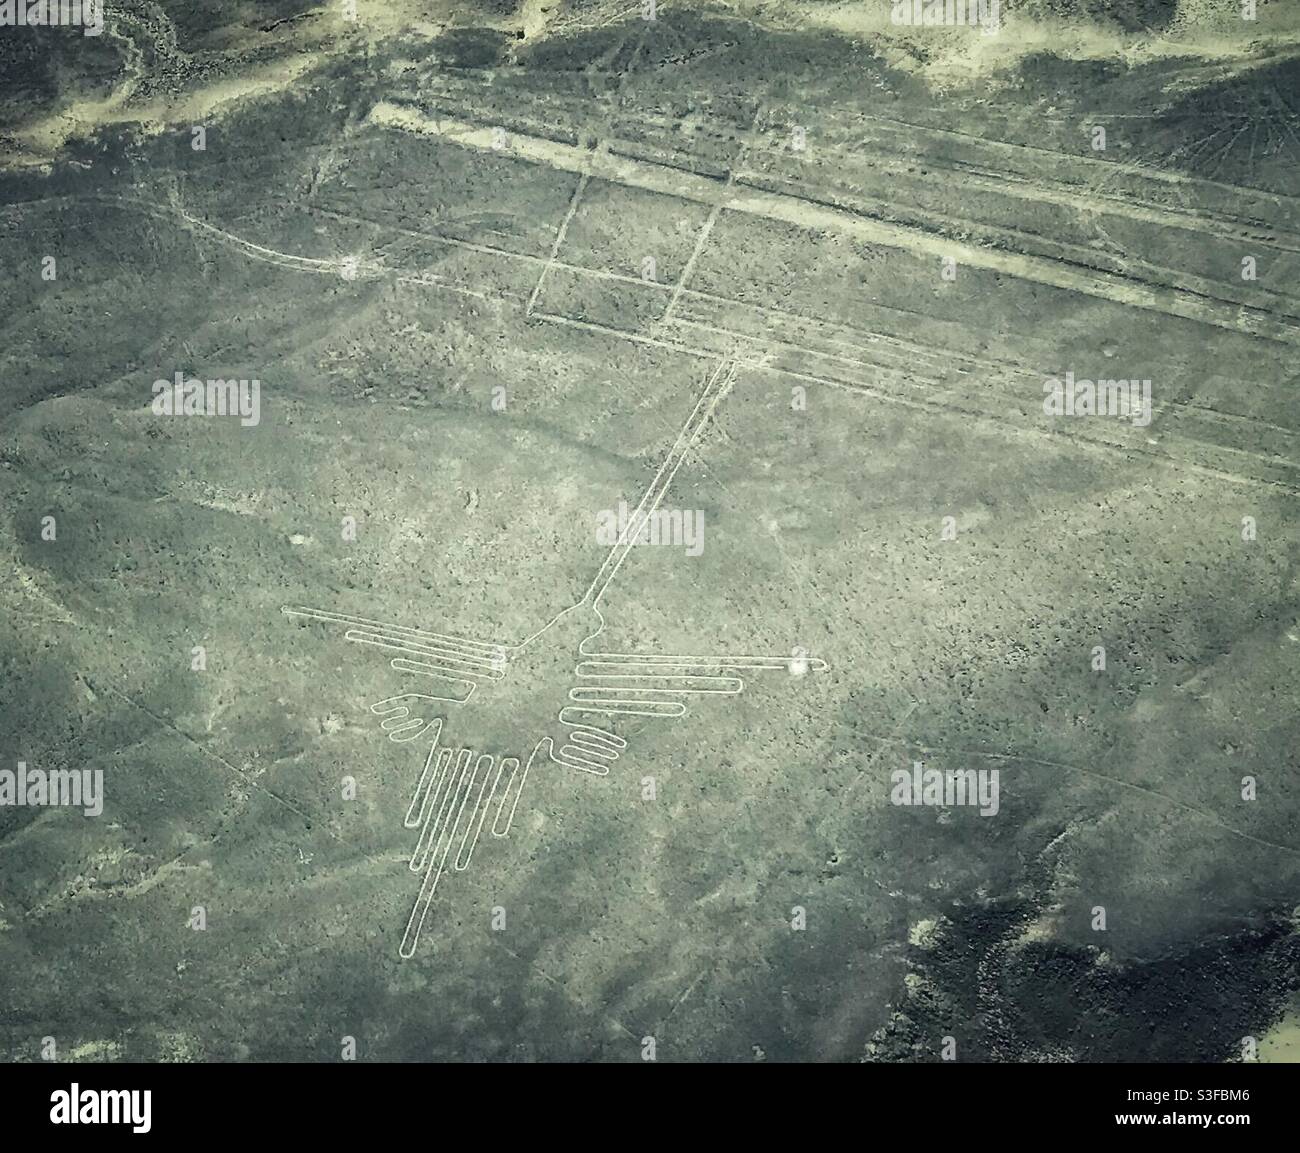 The Hummingbird or Hermit formation in the Nazca Lines, near Nazca, Peru, seen from a tourist flight in a small plane Stock Photo